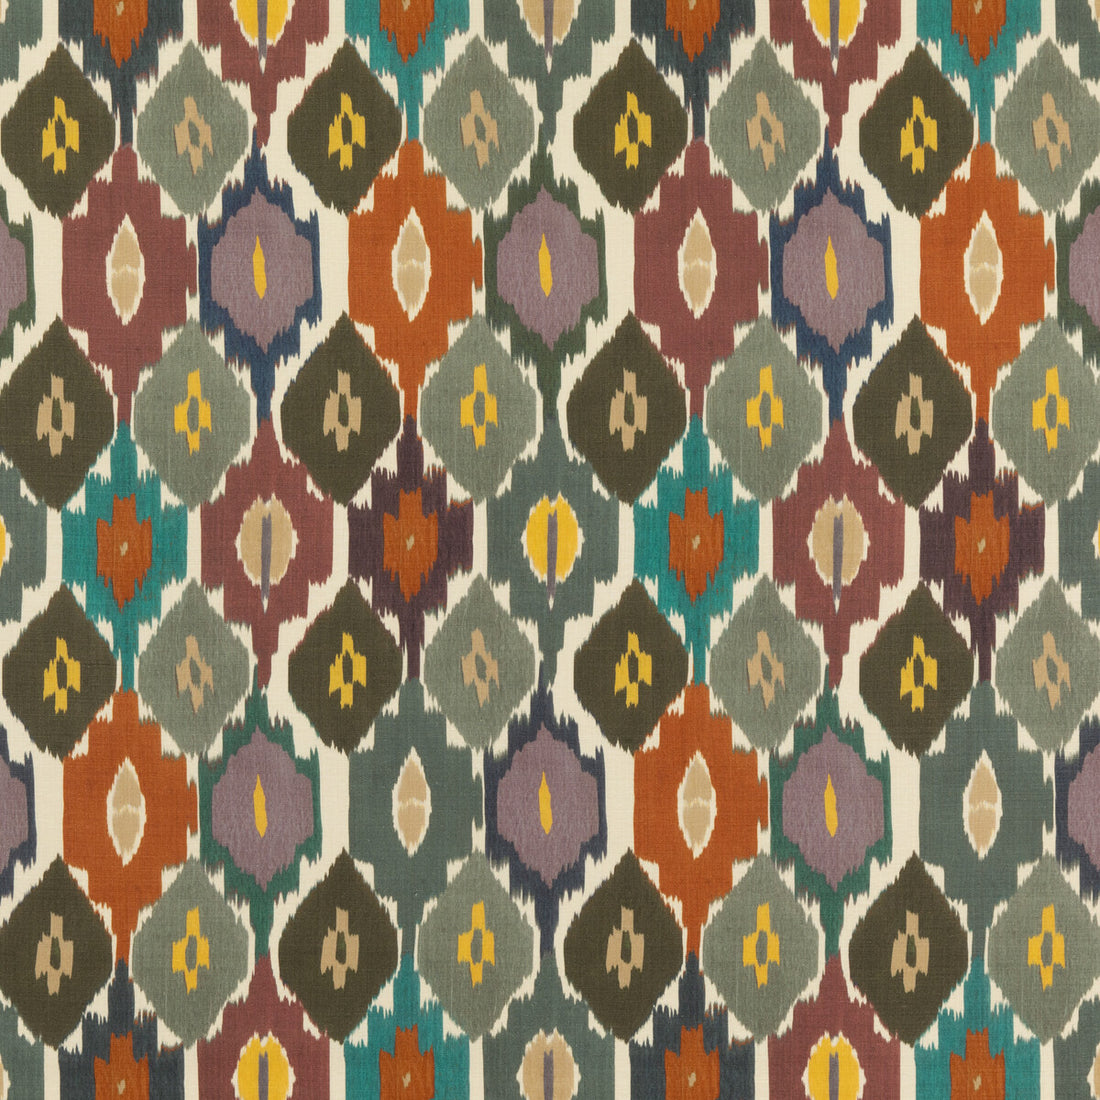 Town House fabric in multi color - pattern FD311.Y101.0 - by Mulberry in the Modern Country II collection